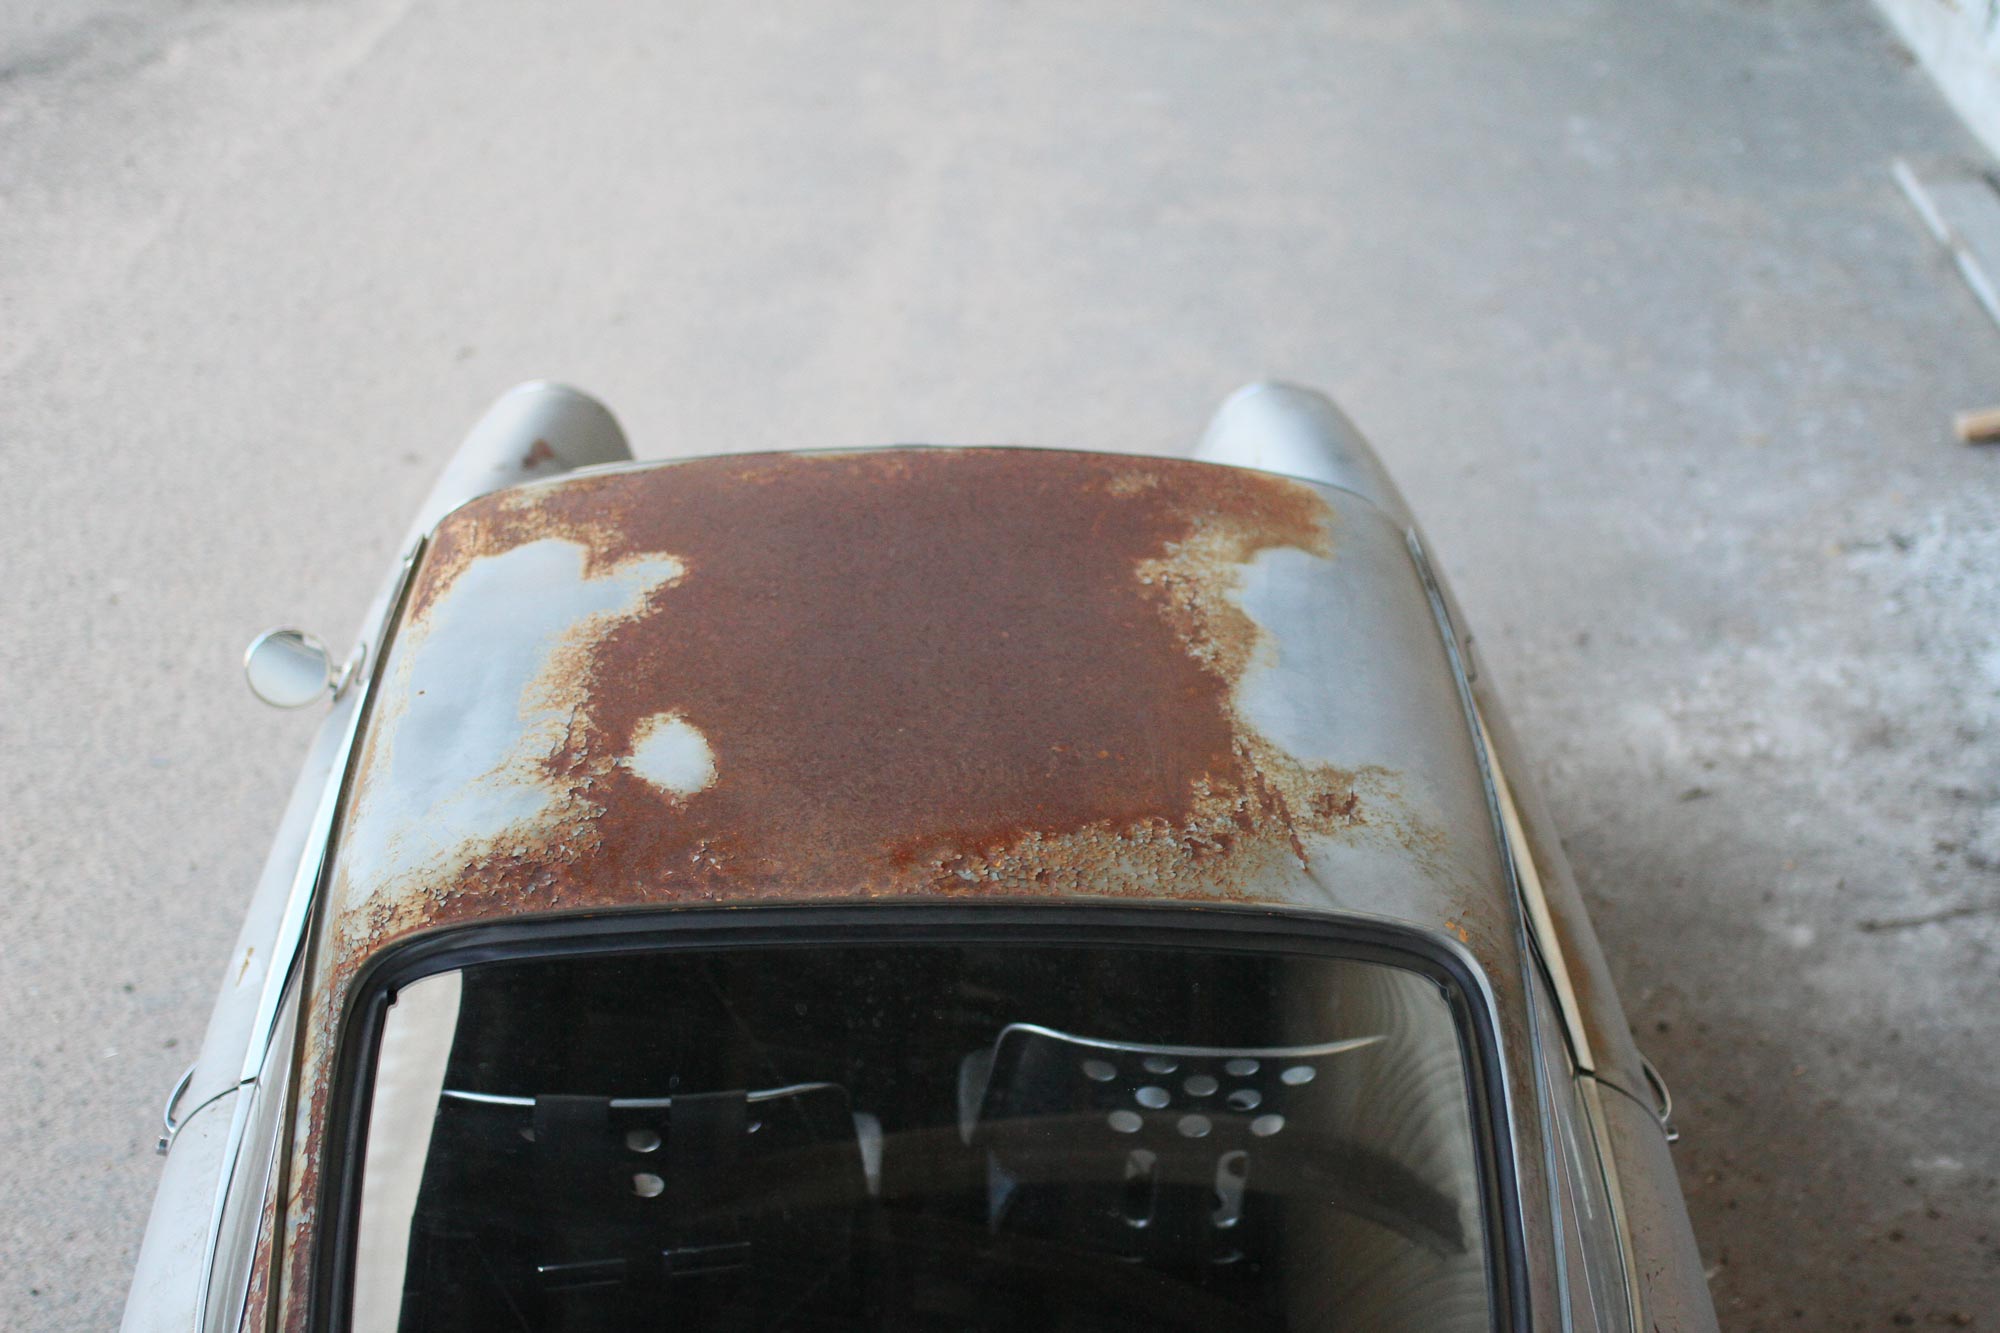 Patina Porsche 912 with a rusty roof and a grey gorund